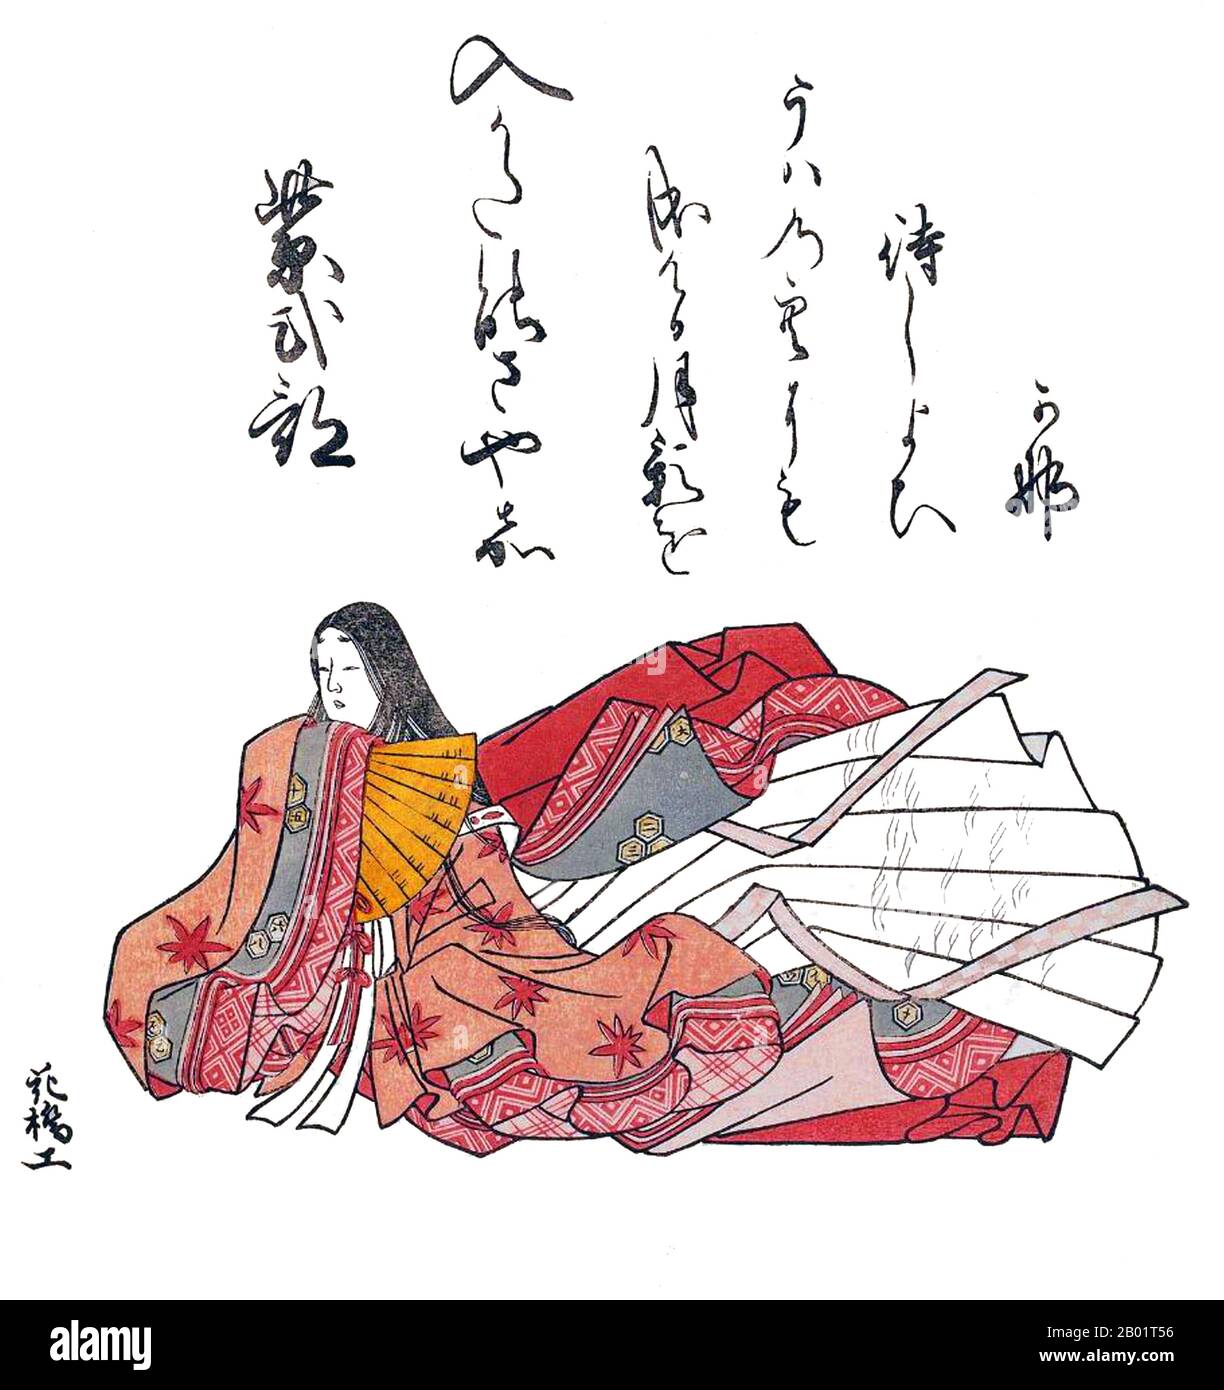 Japan: Lady Murasaki Shikibu (c. 973-1025), poet and novelist. Ukiyo-e Woodblock print by Komatsuken Kiyomitsu  (fl. 18th century), 1765.  Murasaki Shikibu was a Japanese novelist, poet and lady-in-waiting at the Imperial court during the Heian period. She is best known as the author of 'The Tale of Genji', written in Japanese between about 1000 and 1012. Murasaki Shikibu is a nickname; her real name is unknown, but she may have been Fujiwara Takako, who was mentioned in a 1007 court diary as an imperial lady-in-waiting. Stock Photo